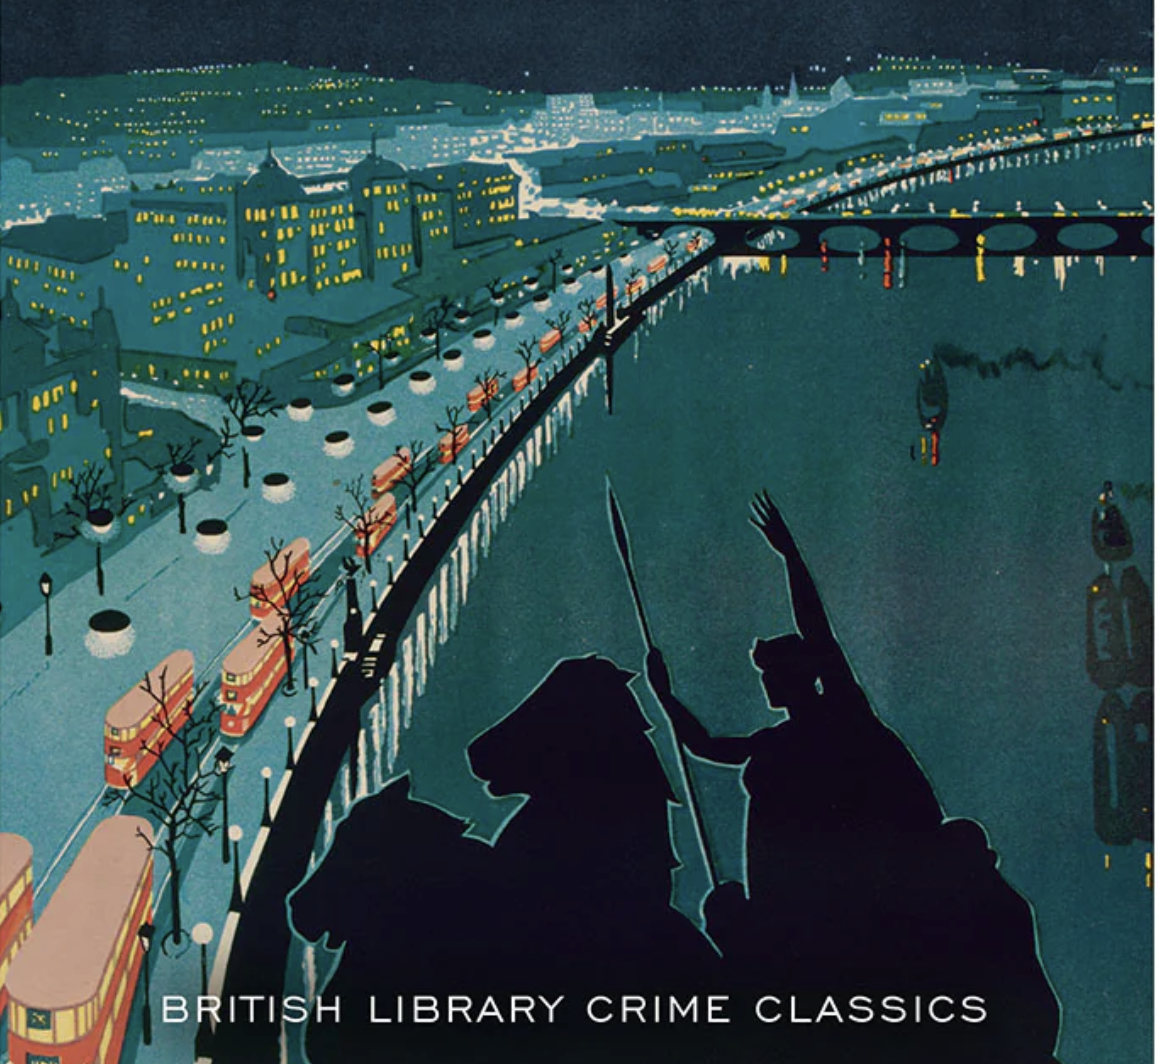 A cover from a British Library Crime Classic book.